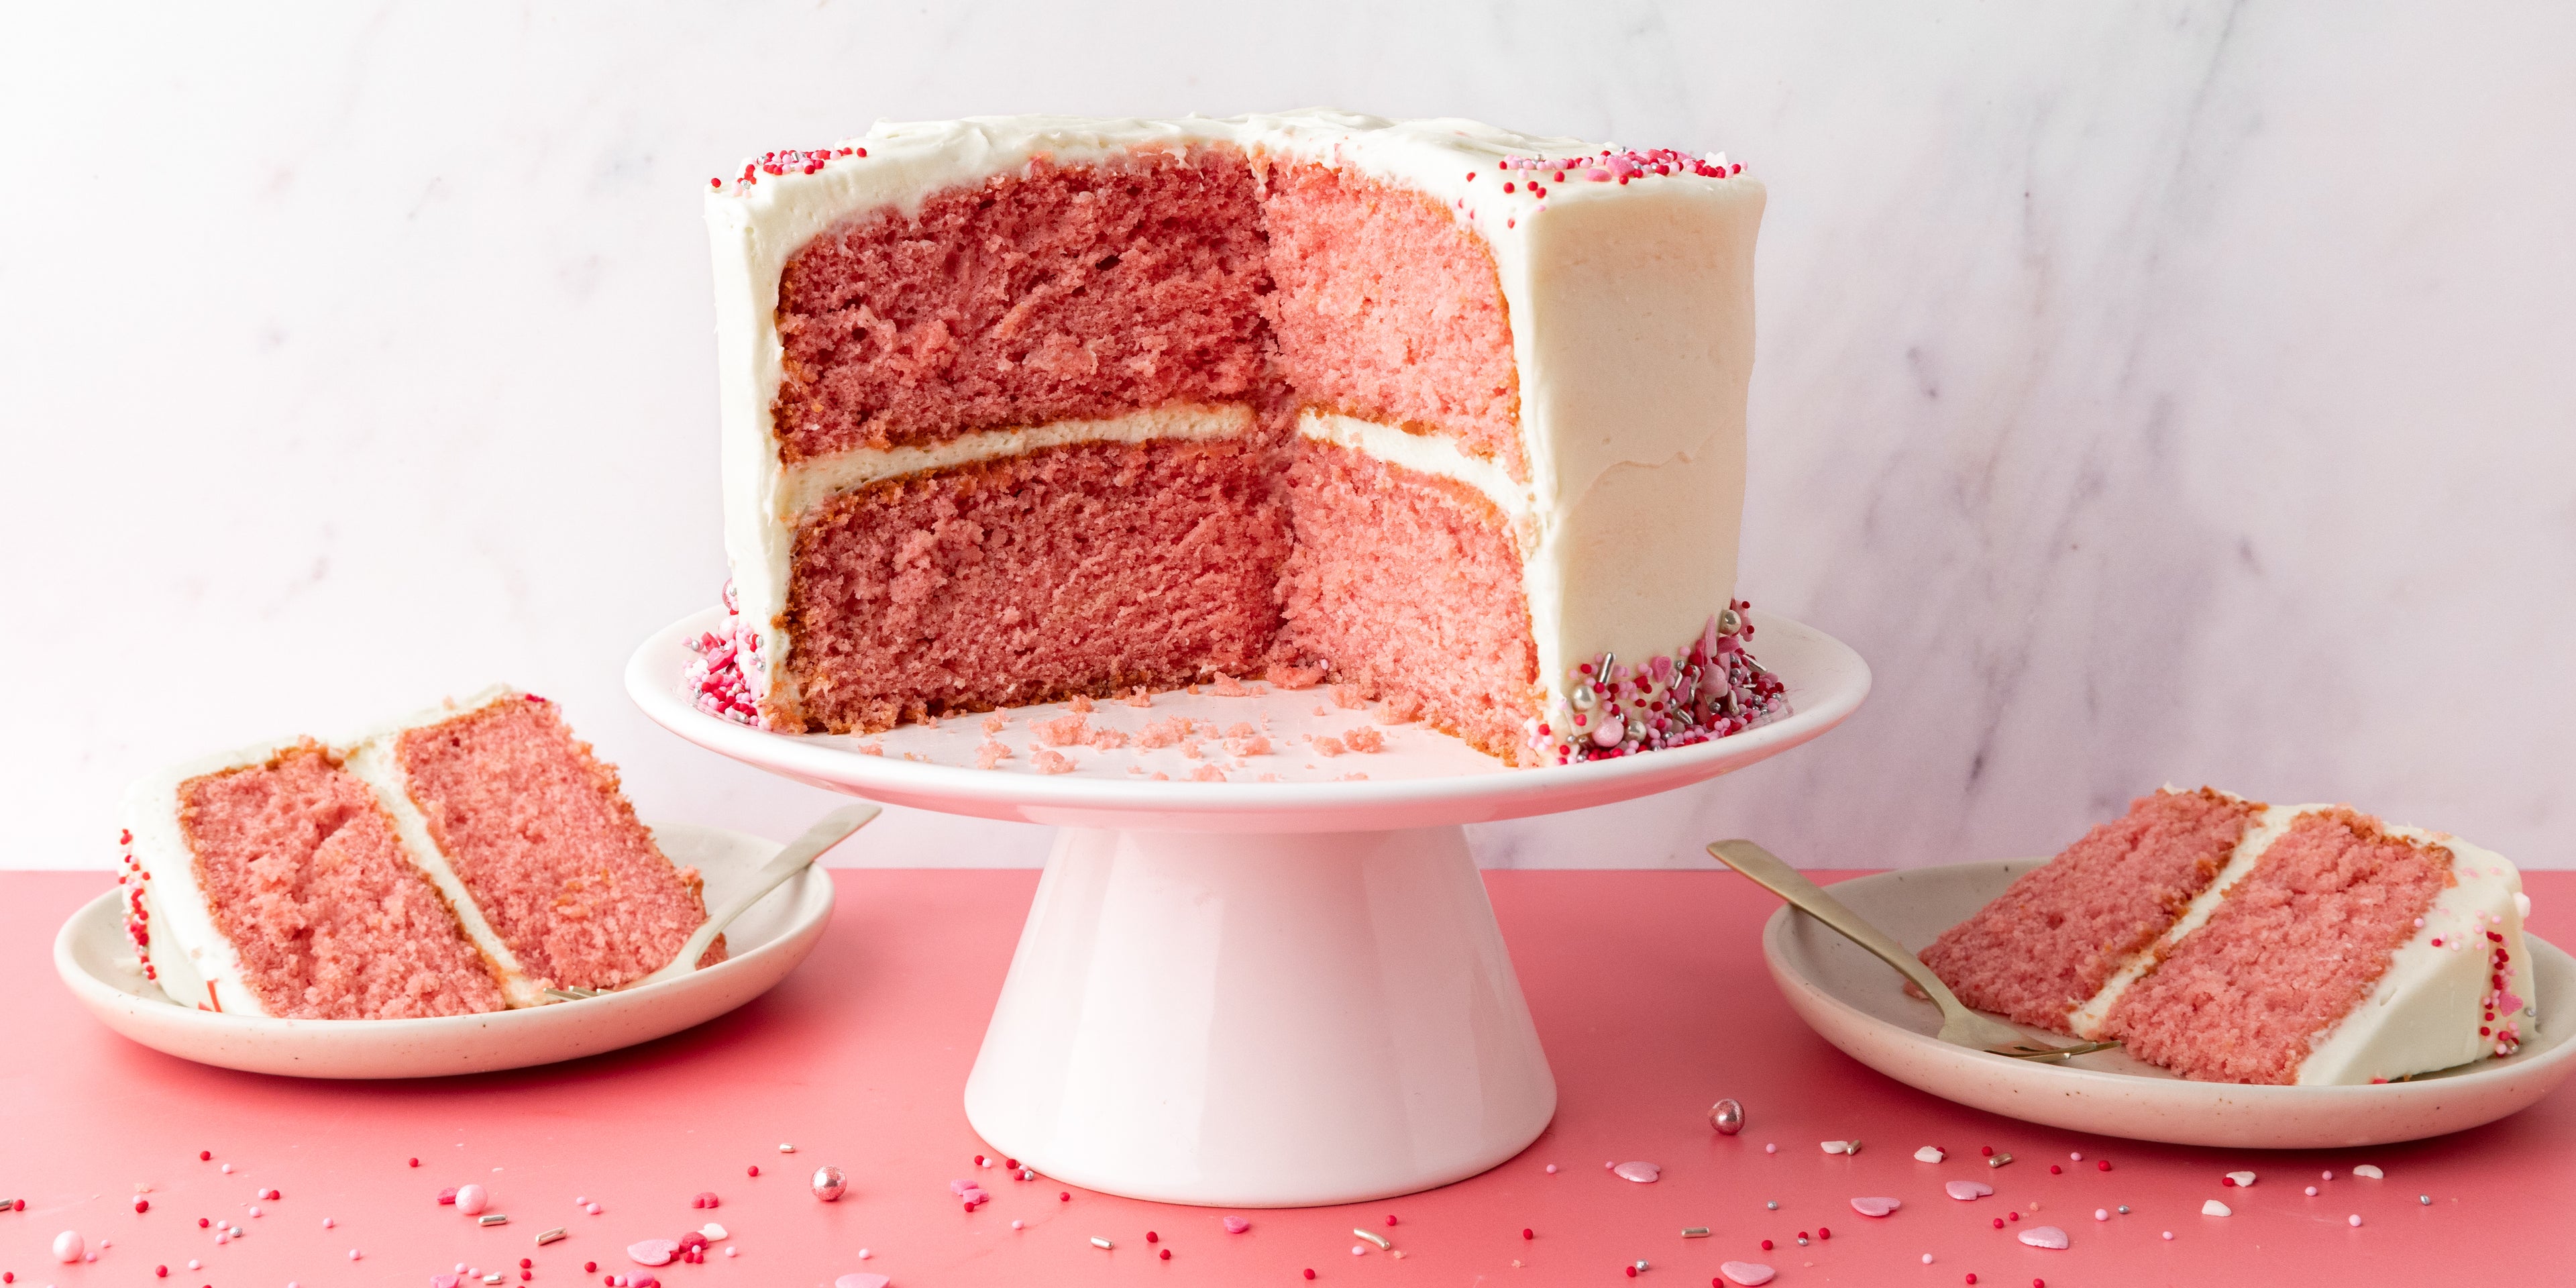 Cake sliced open to show a pink centre and coated in a white buttercream with pink sprinkles